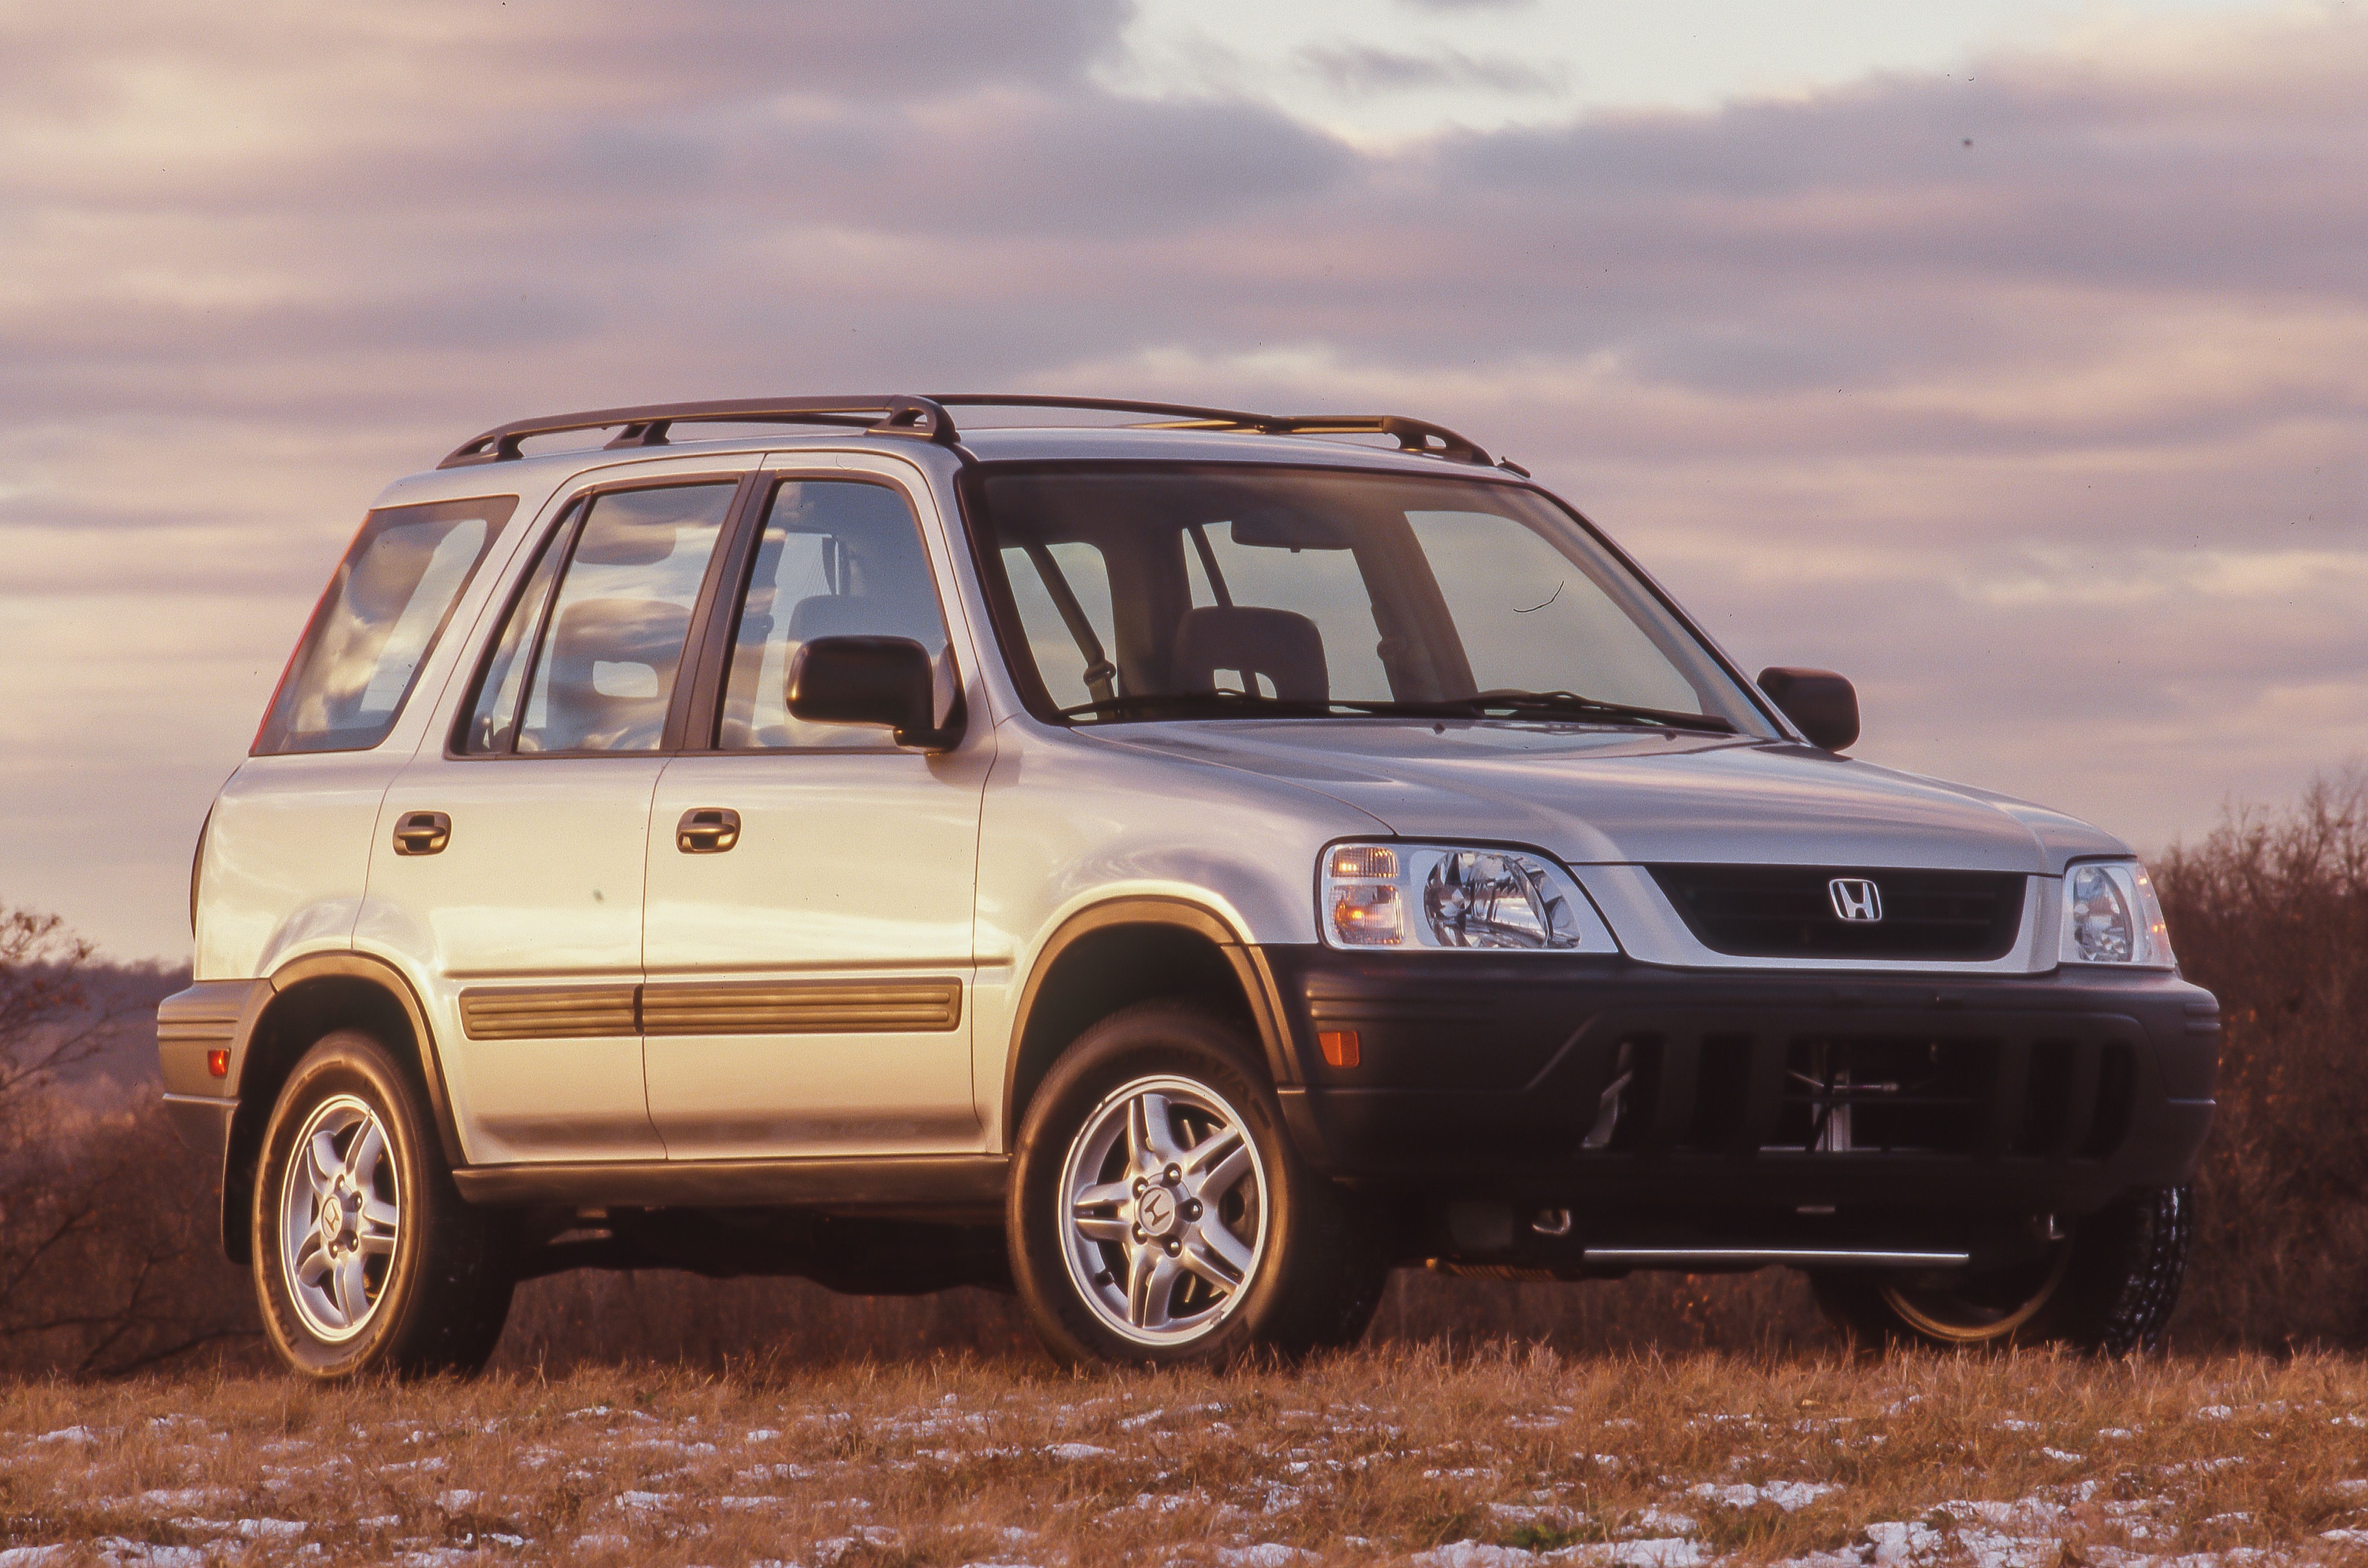 Tested: 1997 Honda CR-V Launches into the SUV Race